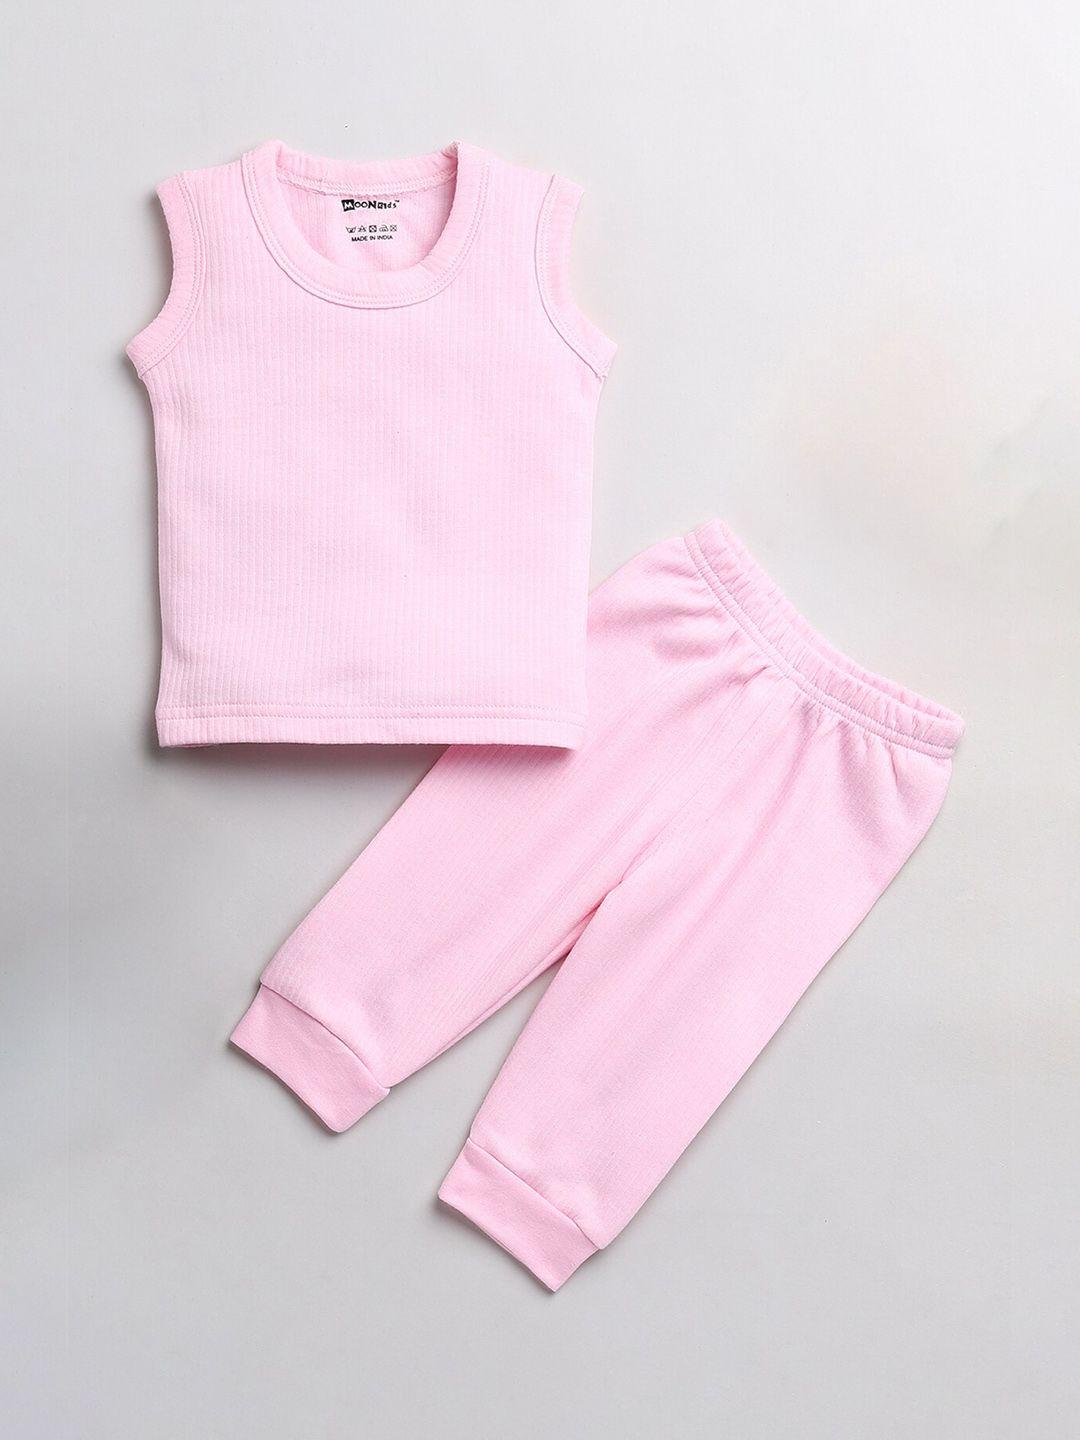 moonkids boys pink solid sleeveless cotton thermal set